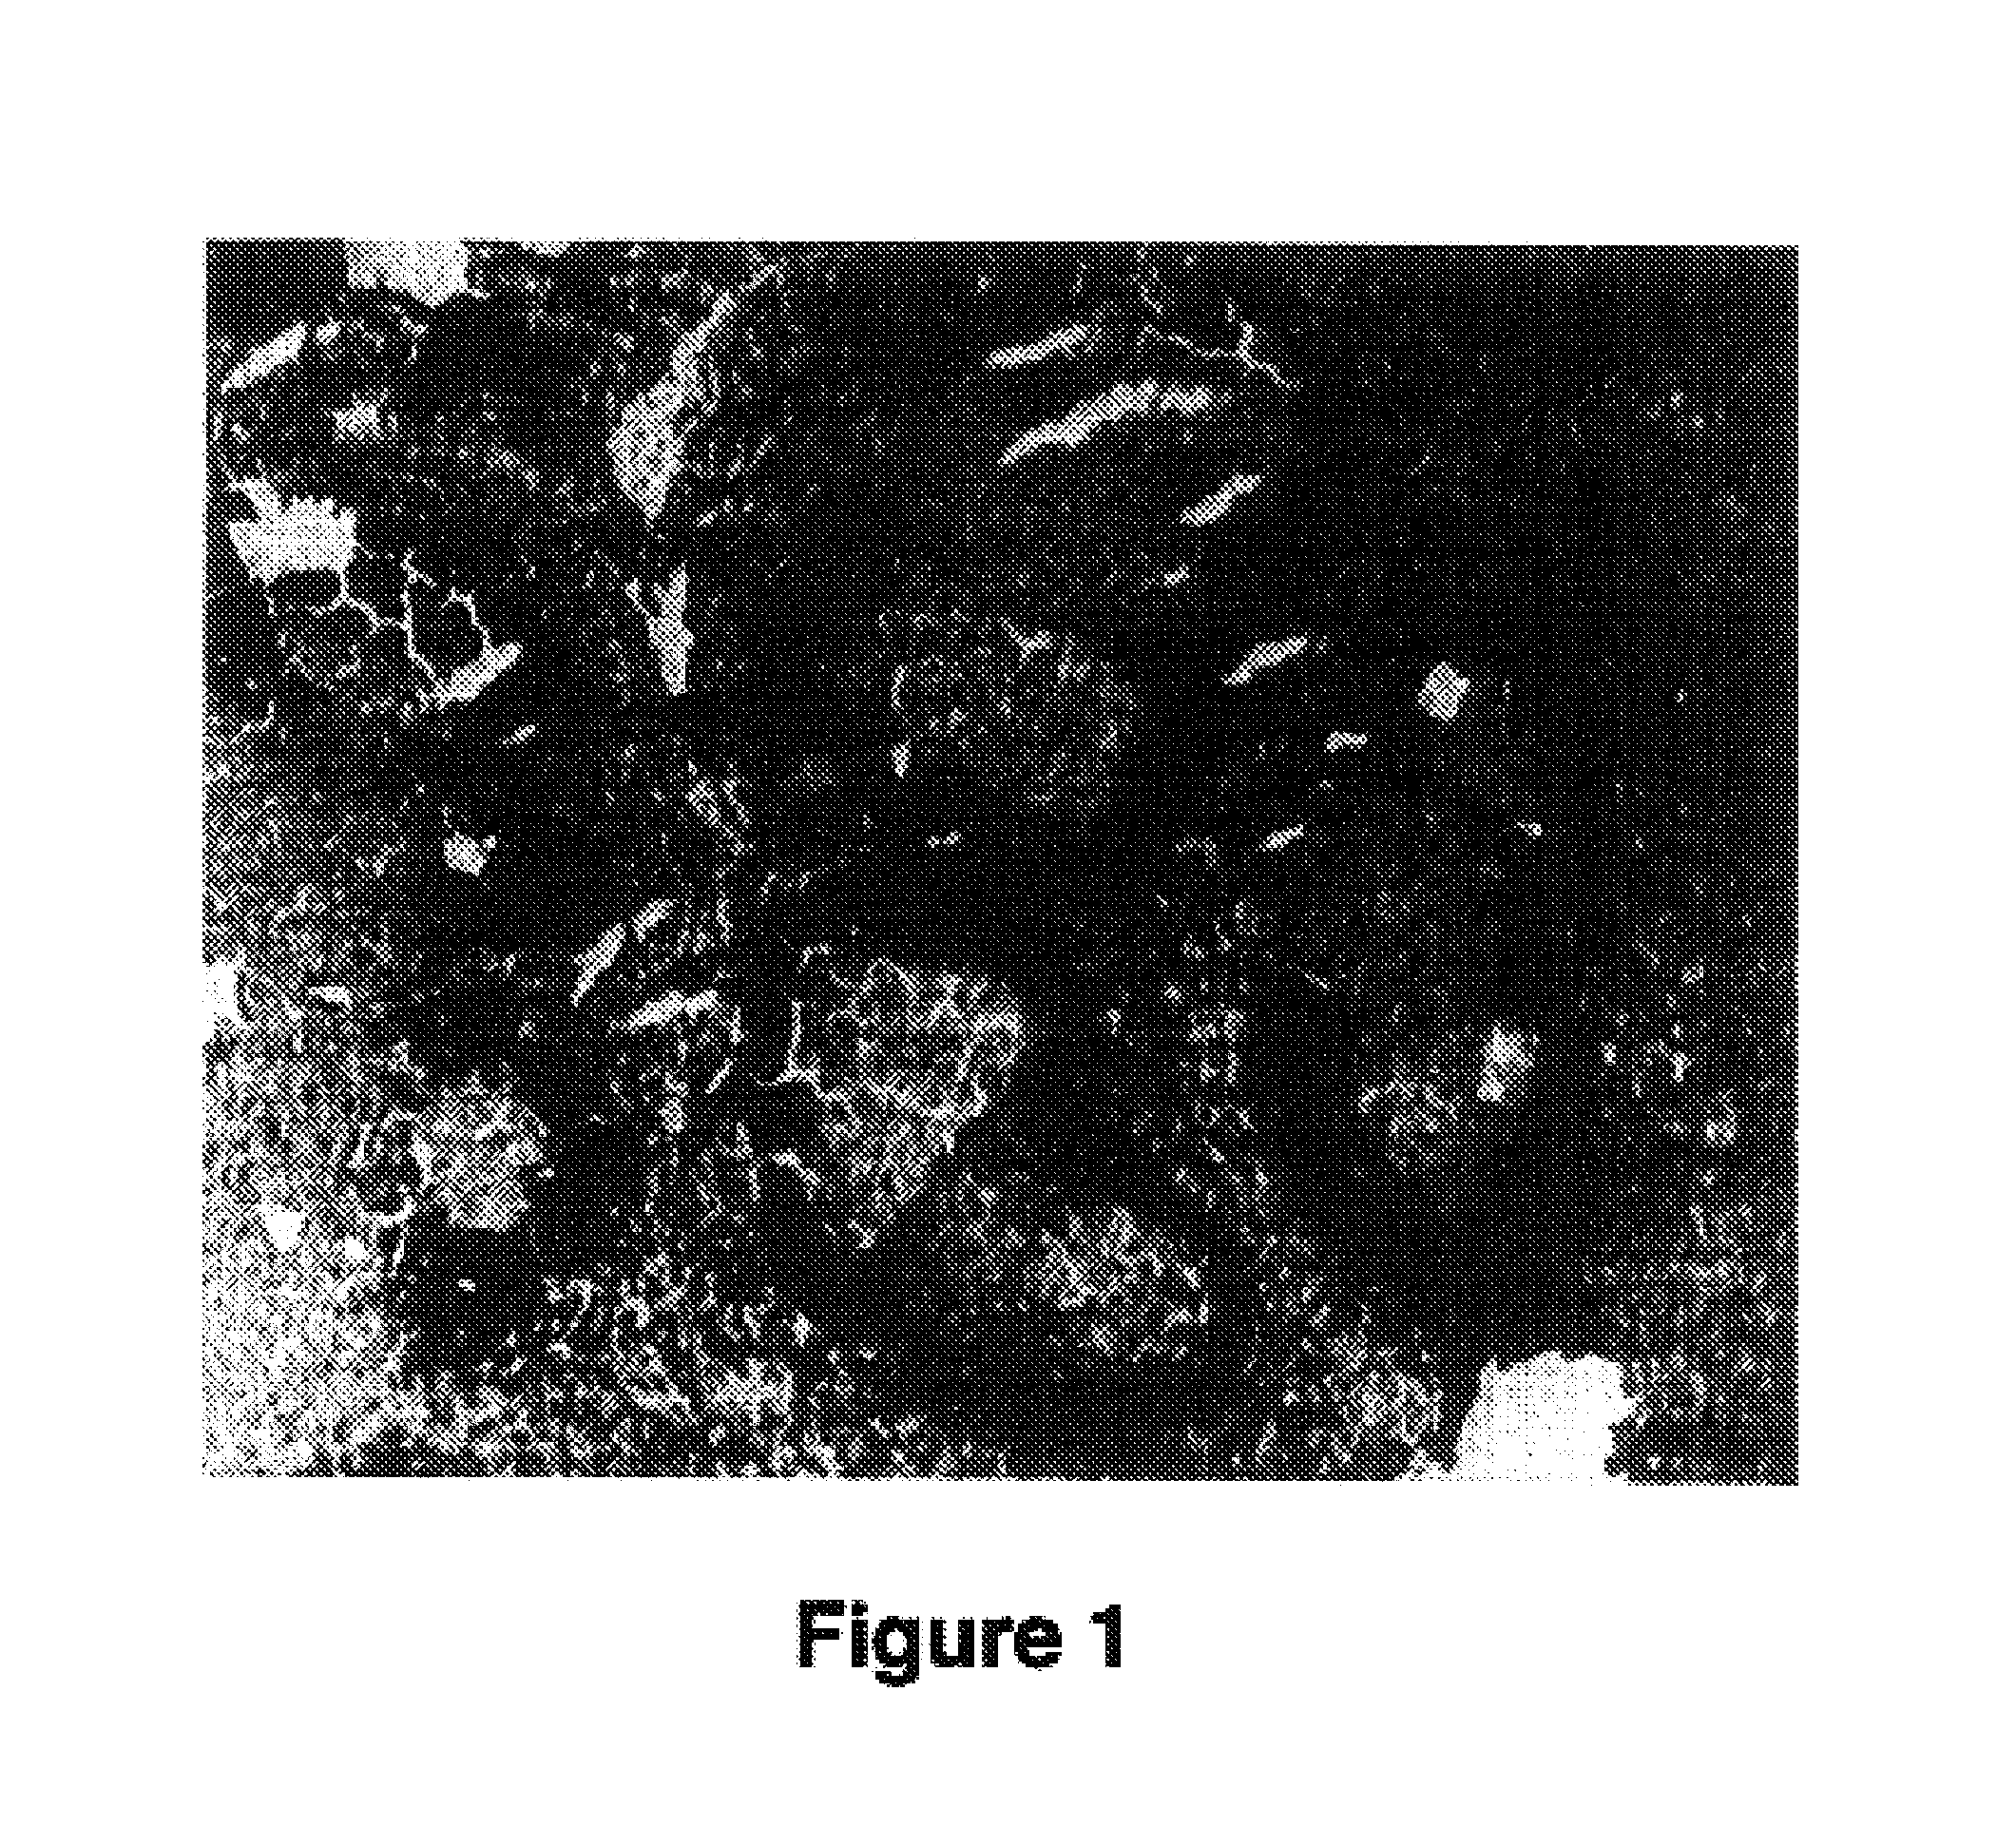 Antibodies against epitopes with homology to self antigens, methods of preparation and applications thereof